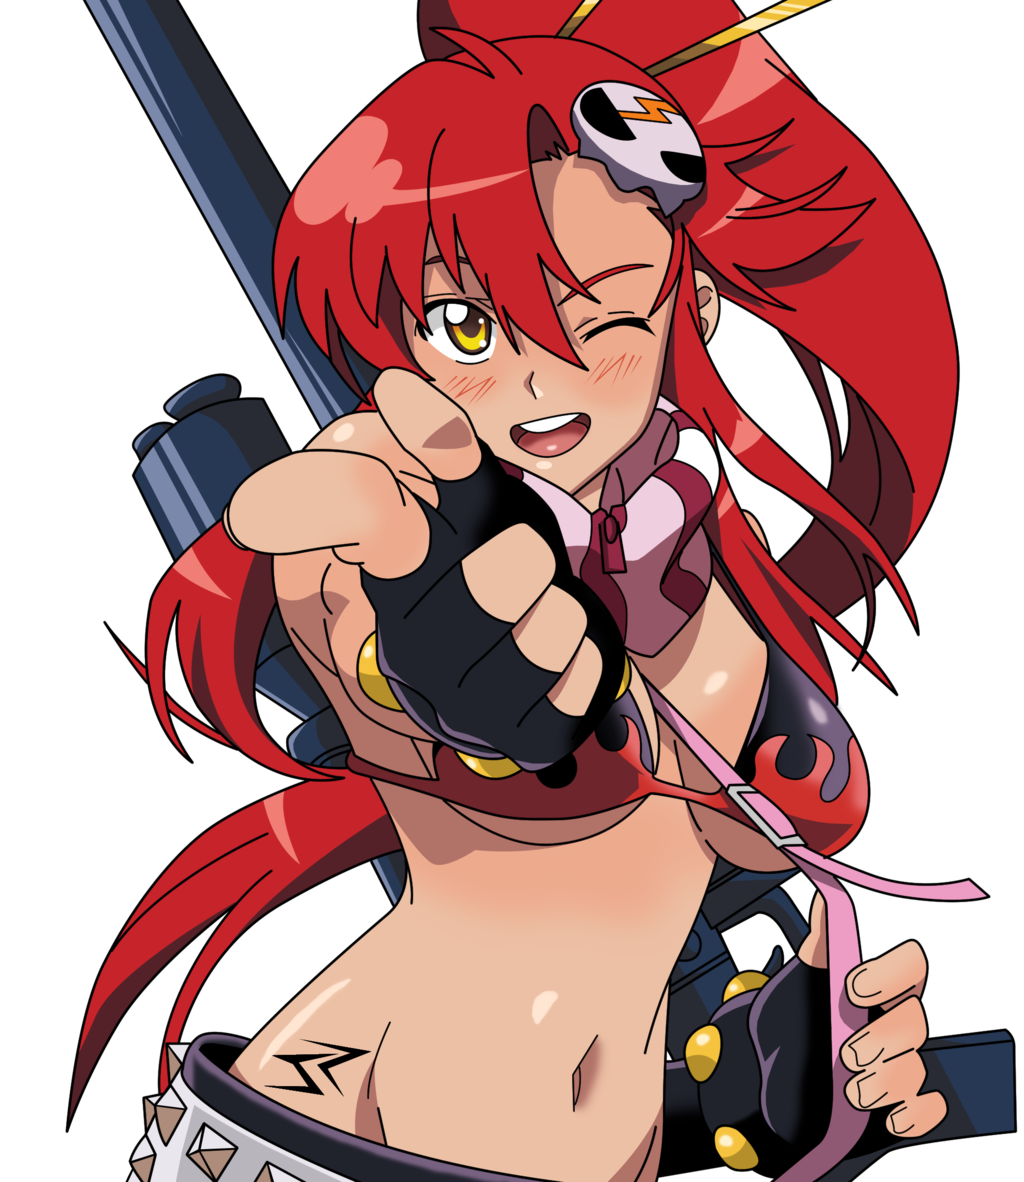 http://images1.wikia.nocookie.net/__cb20130409011243/anime-arts/images/0/01/Yoko.png